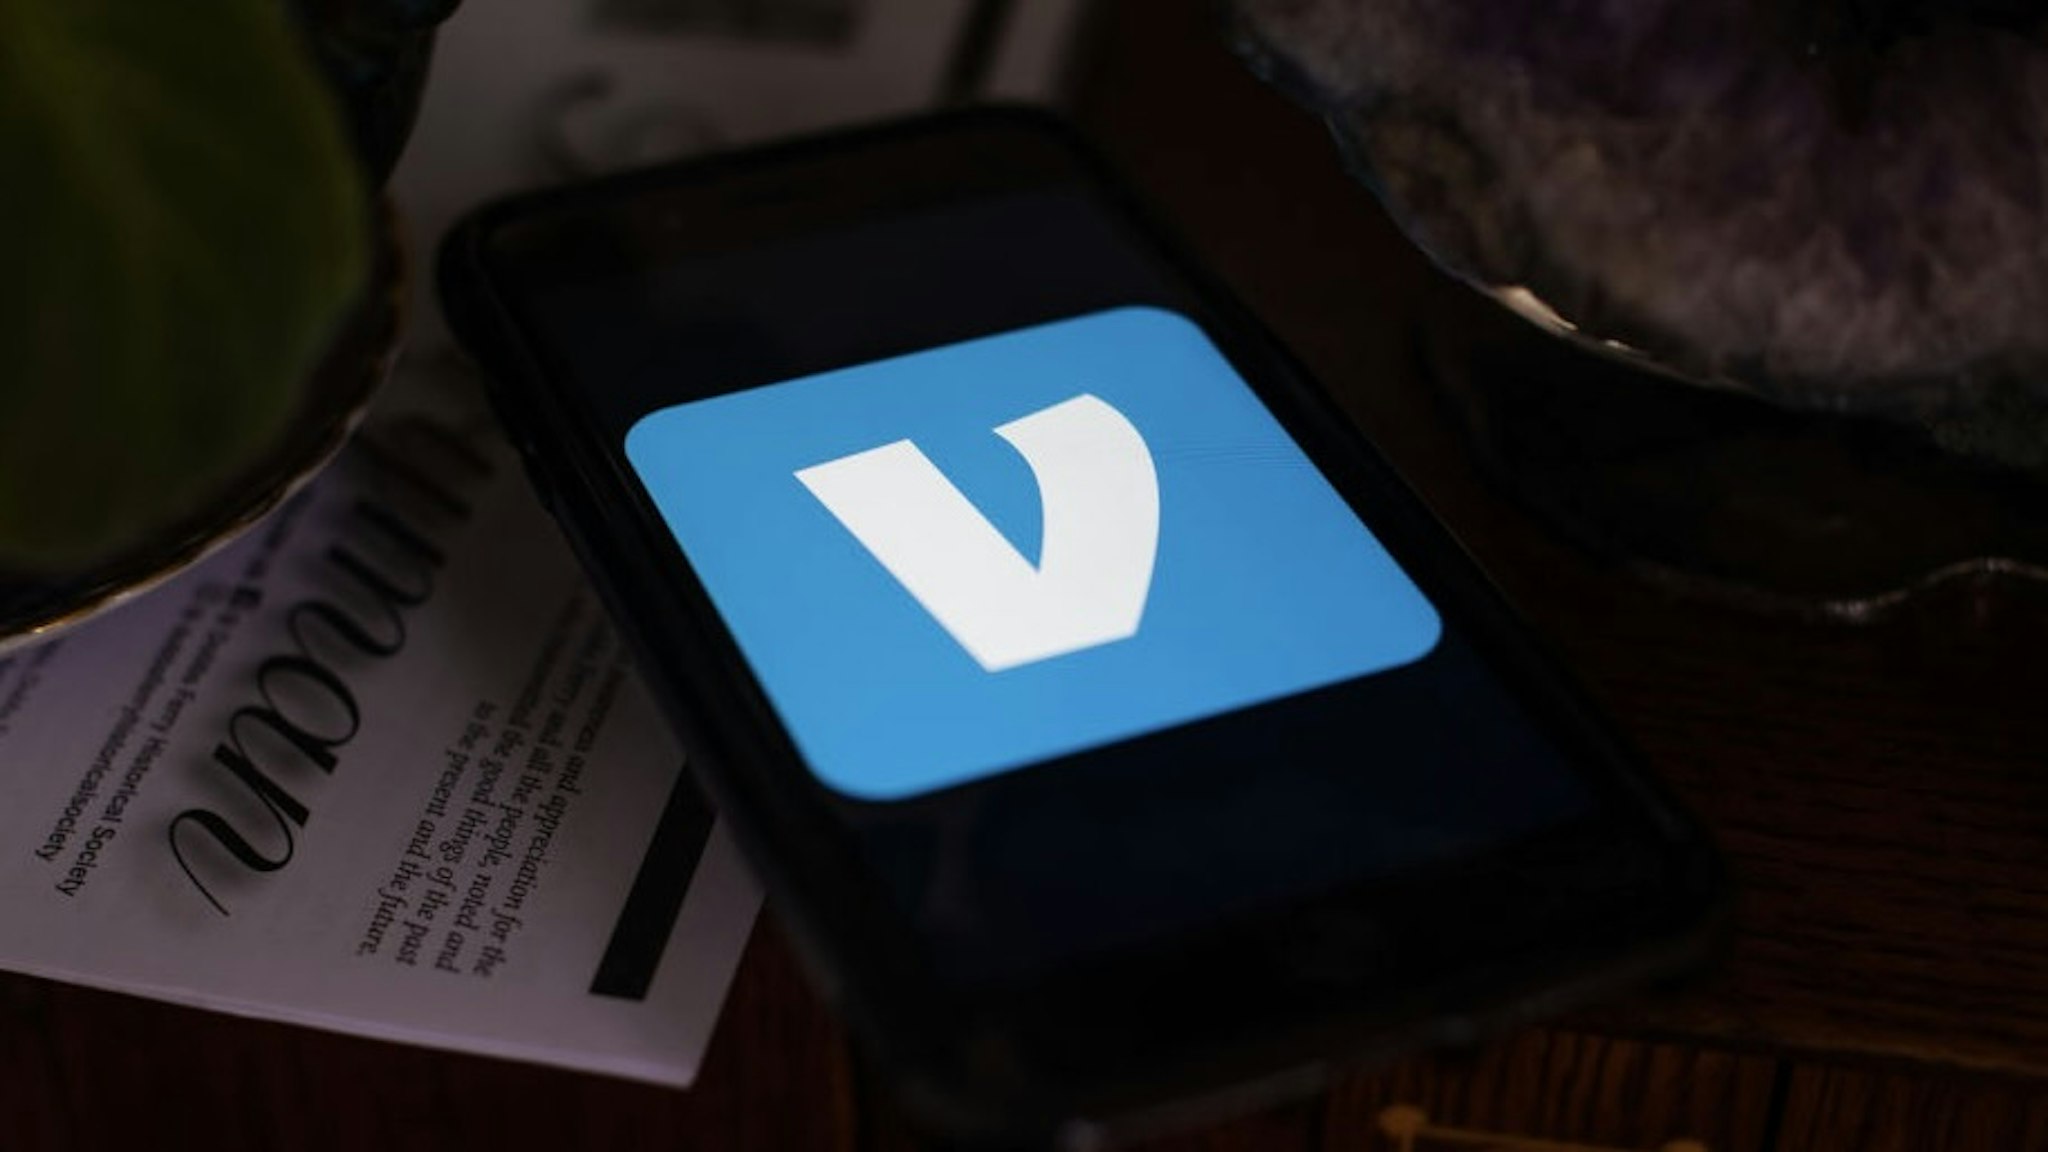 The Venmo logo on a mobile phone arranged in Dobbs Ferry, New York, U.S., on Saturday, Feb. 13, 2021. PayPal Holdings Inc. demonstrated new versions of PayPal and Venmo wallets that are rolling out in the second quarter. Photographer: Tiffany Hagler-Geard/Bloomberg